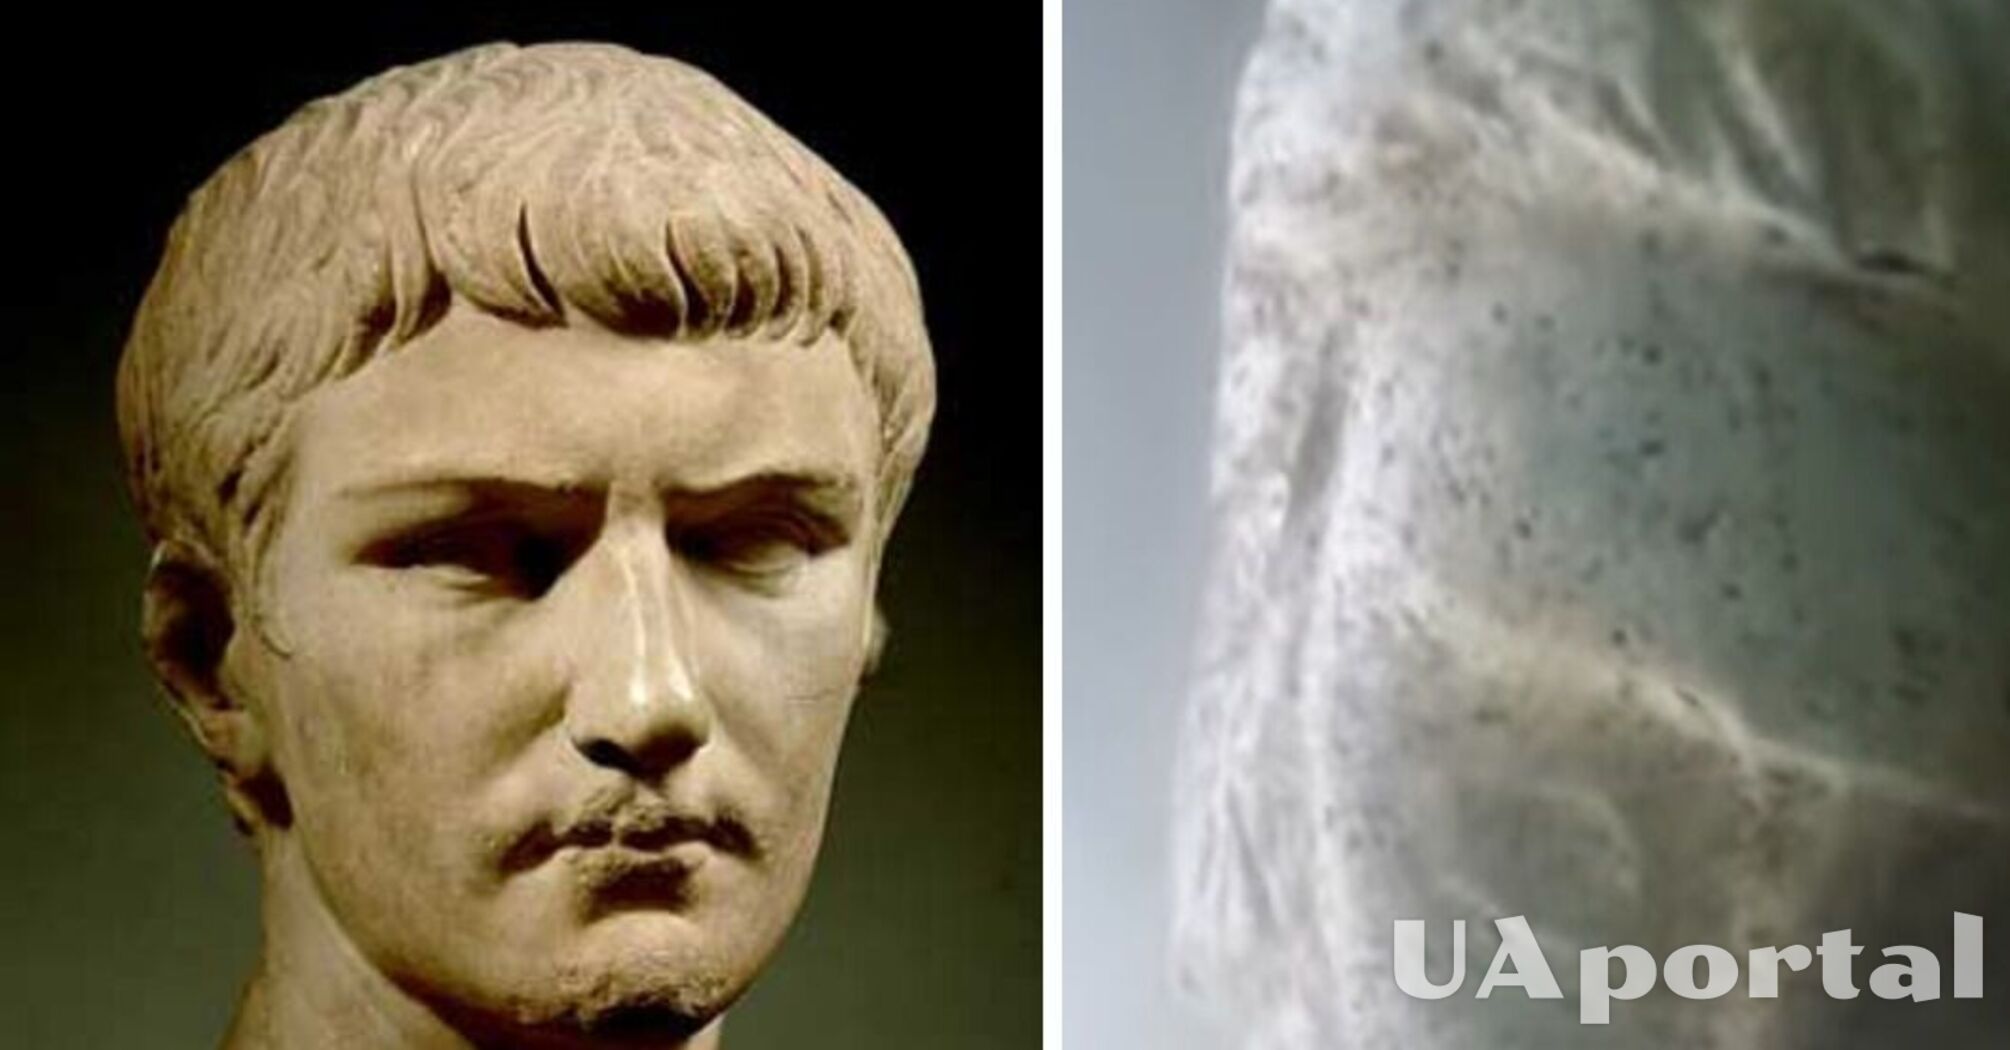 A relic of Caligula's time found in Lake Nemi in Italy (video)